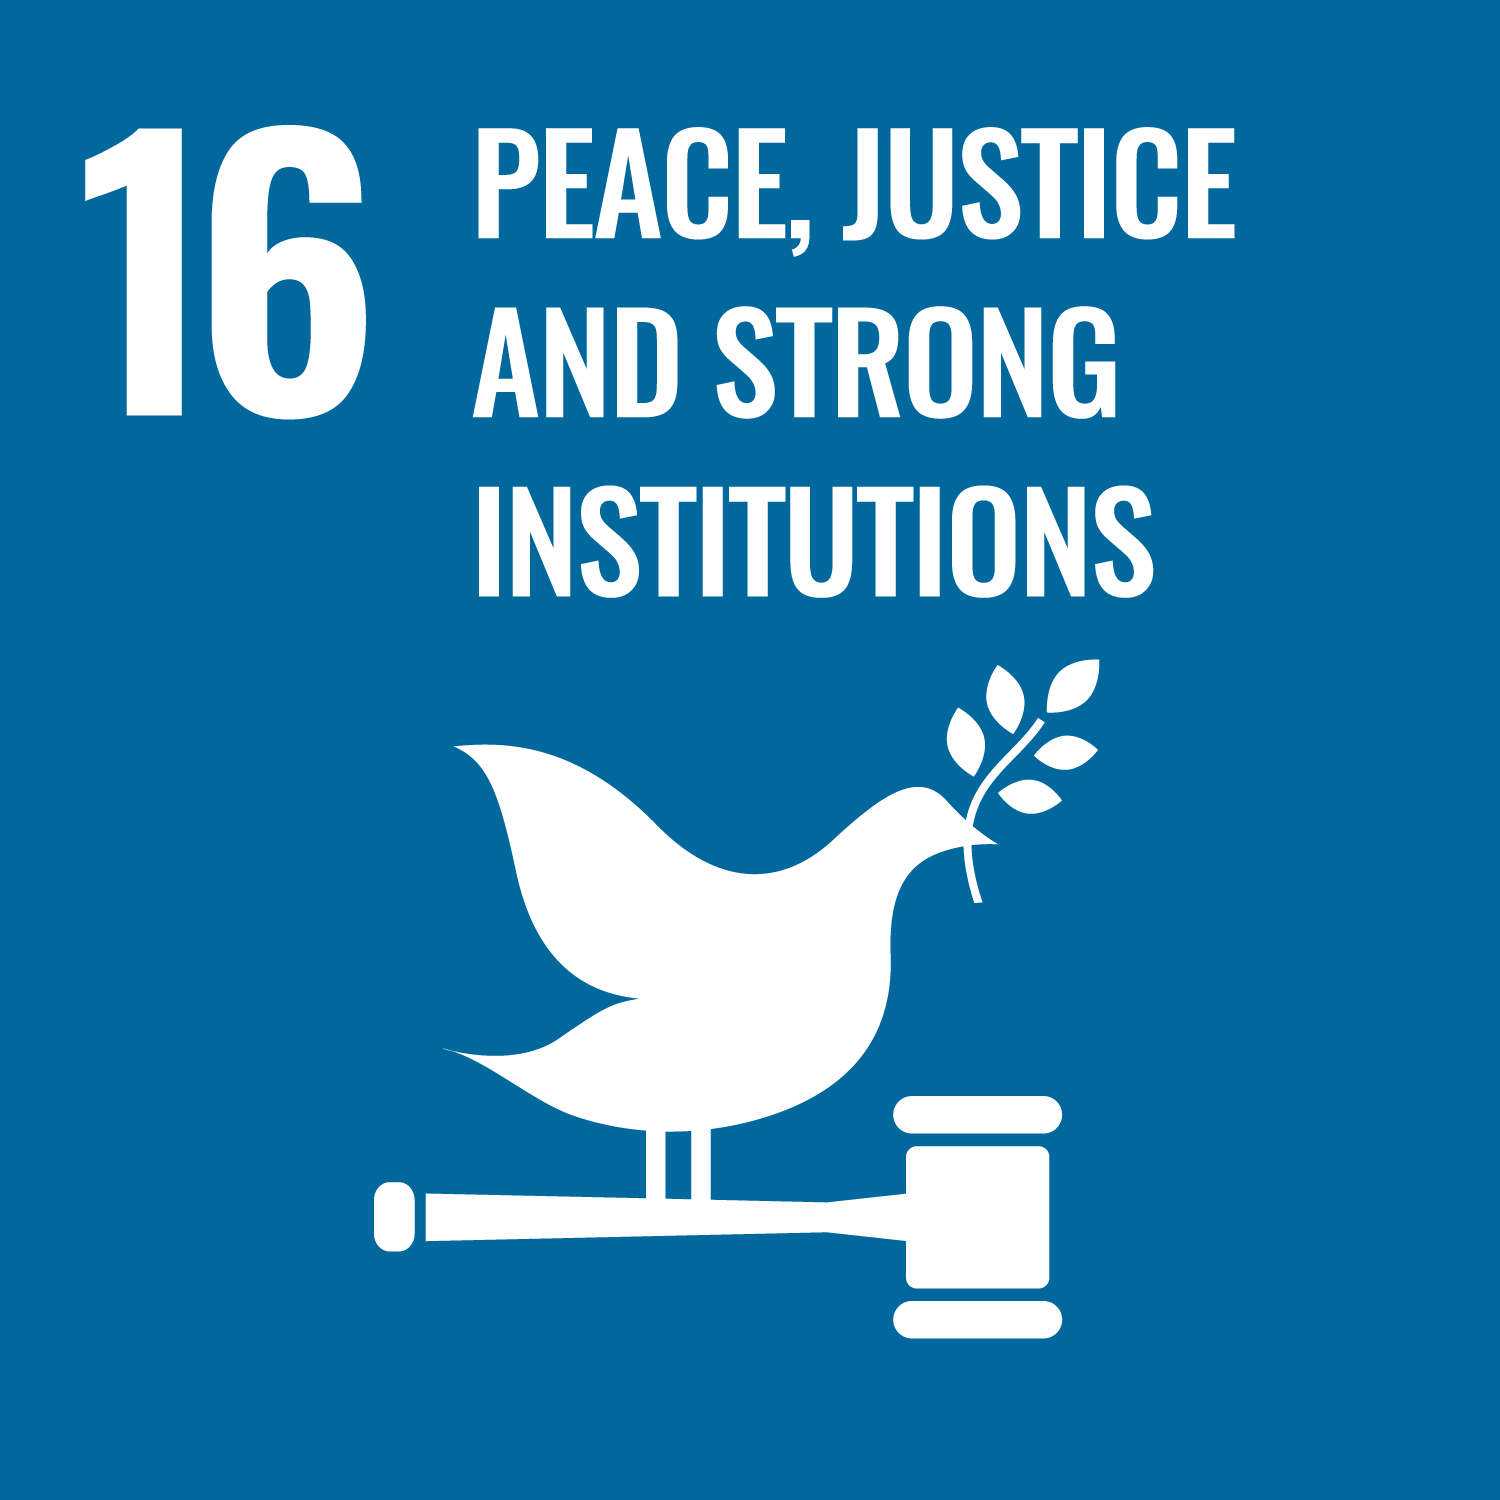 Goal 16: <span>Peace, Justice and Strong Institutions</span>